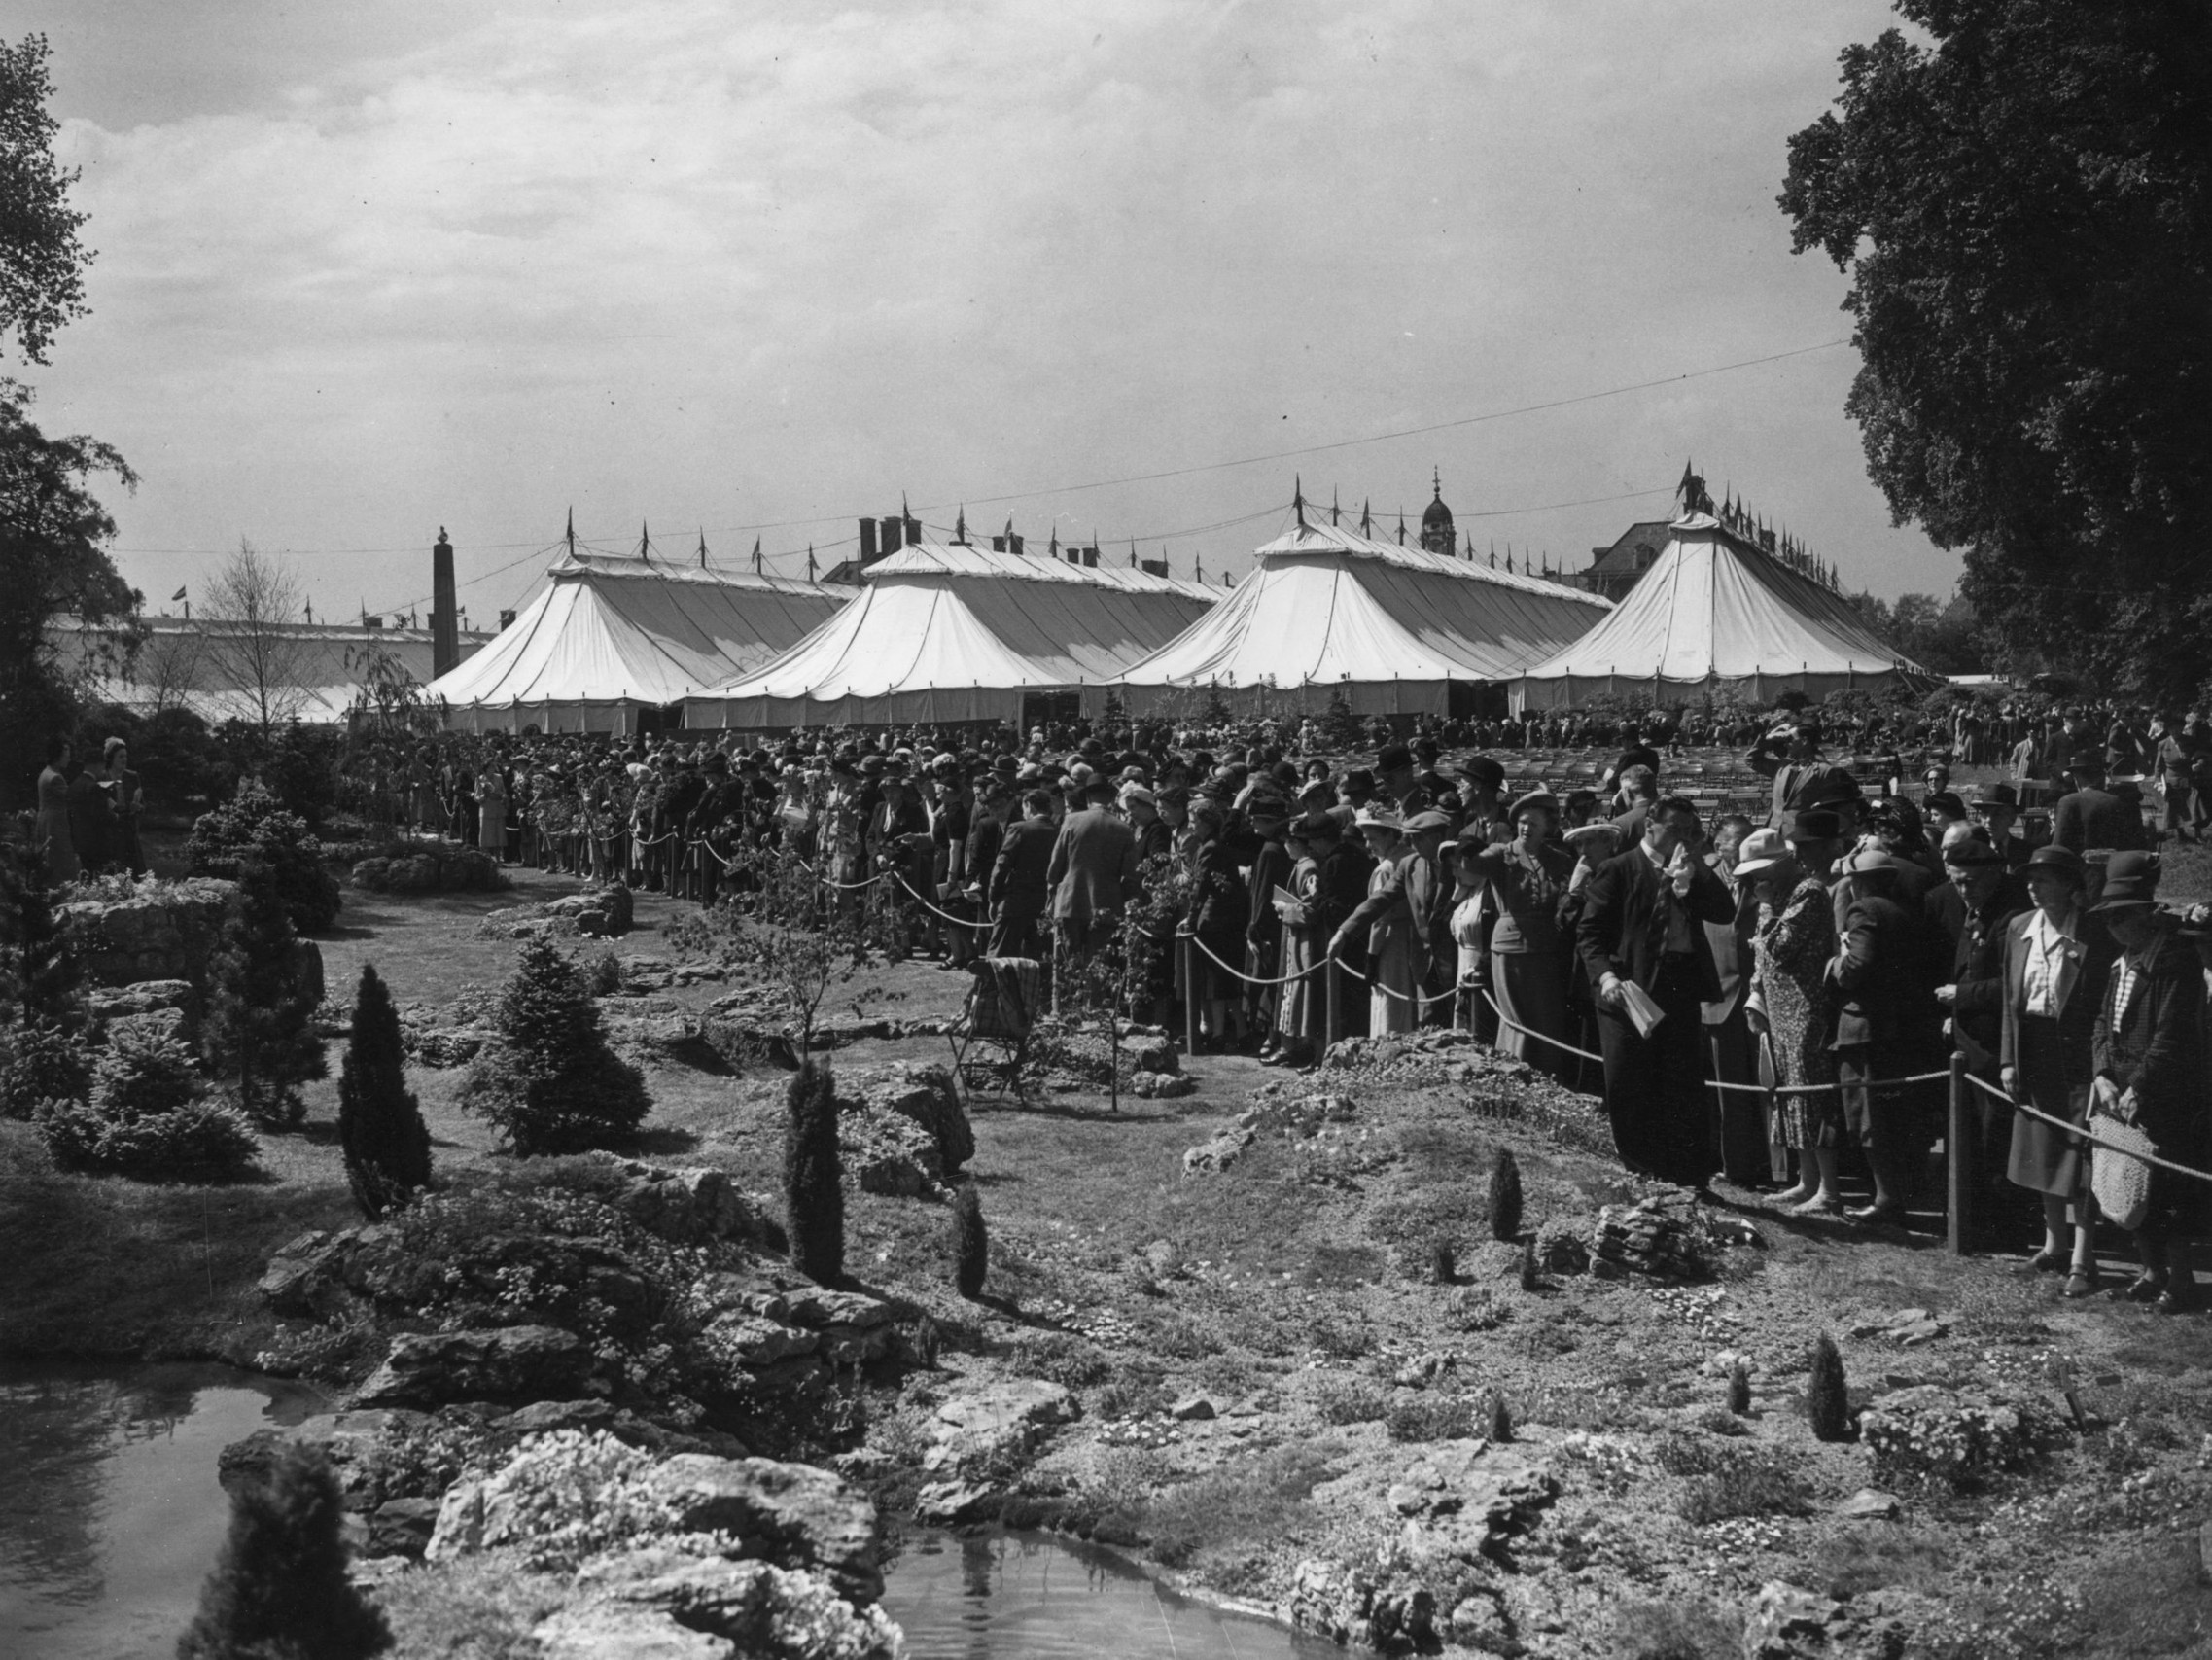 May 1950: Crowds looking at the rock gardens during a private view at the Chelsea Flower Show in London.